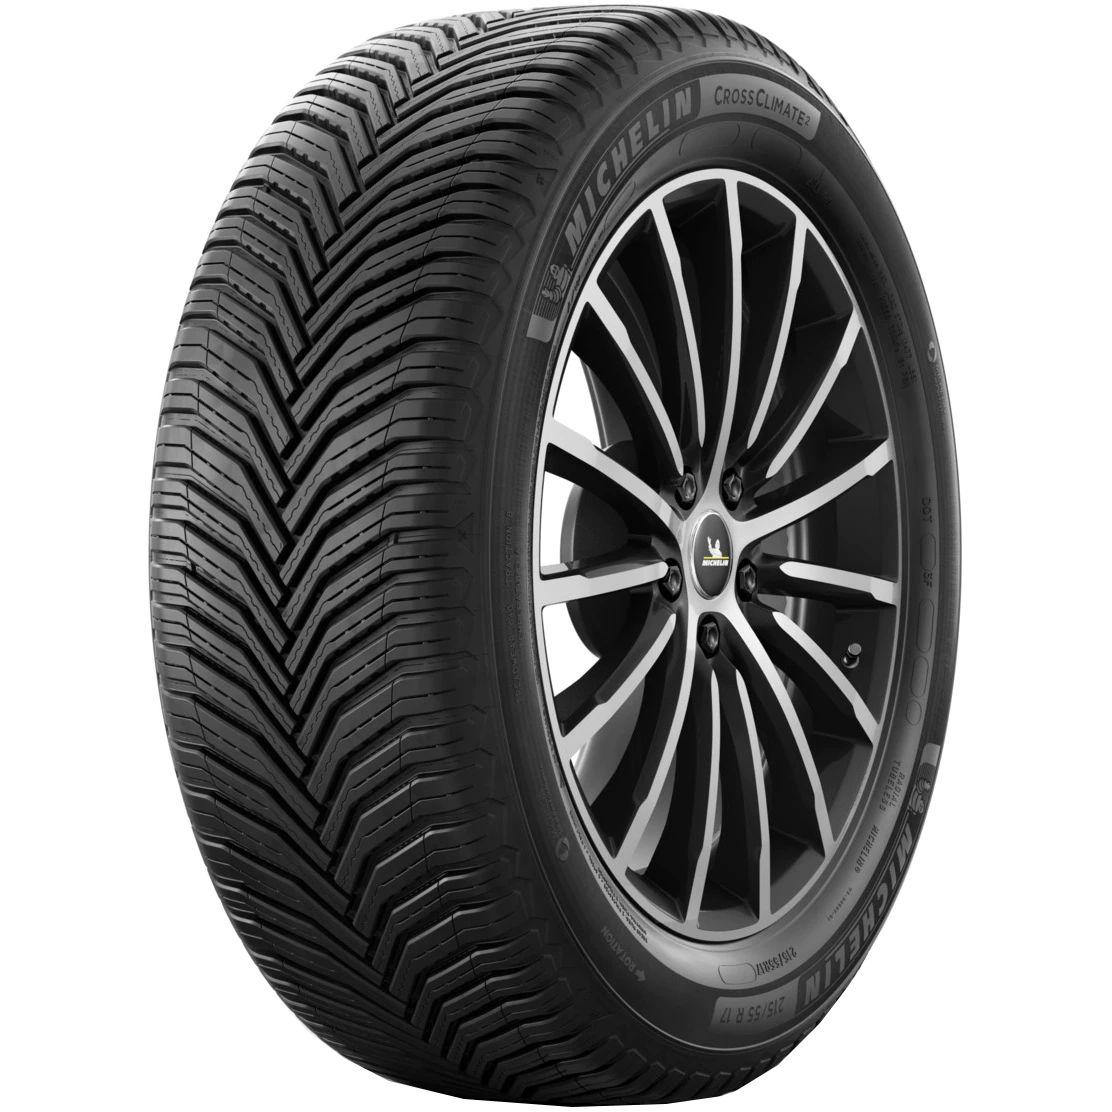 Anvelope all seasons MICHELIN CrossClimate2 Suv M+S 235/55 R19 105W